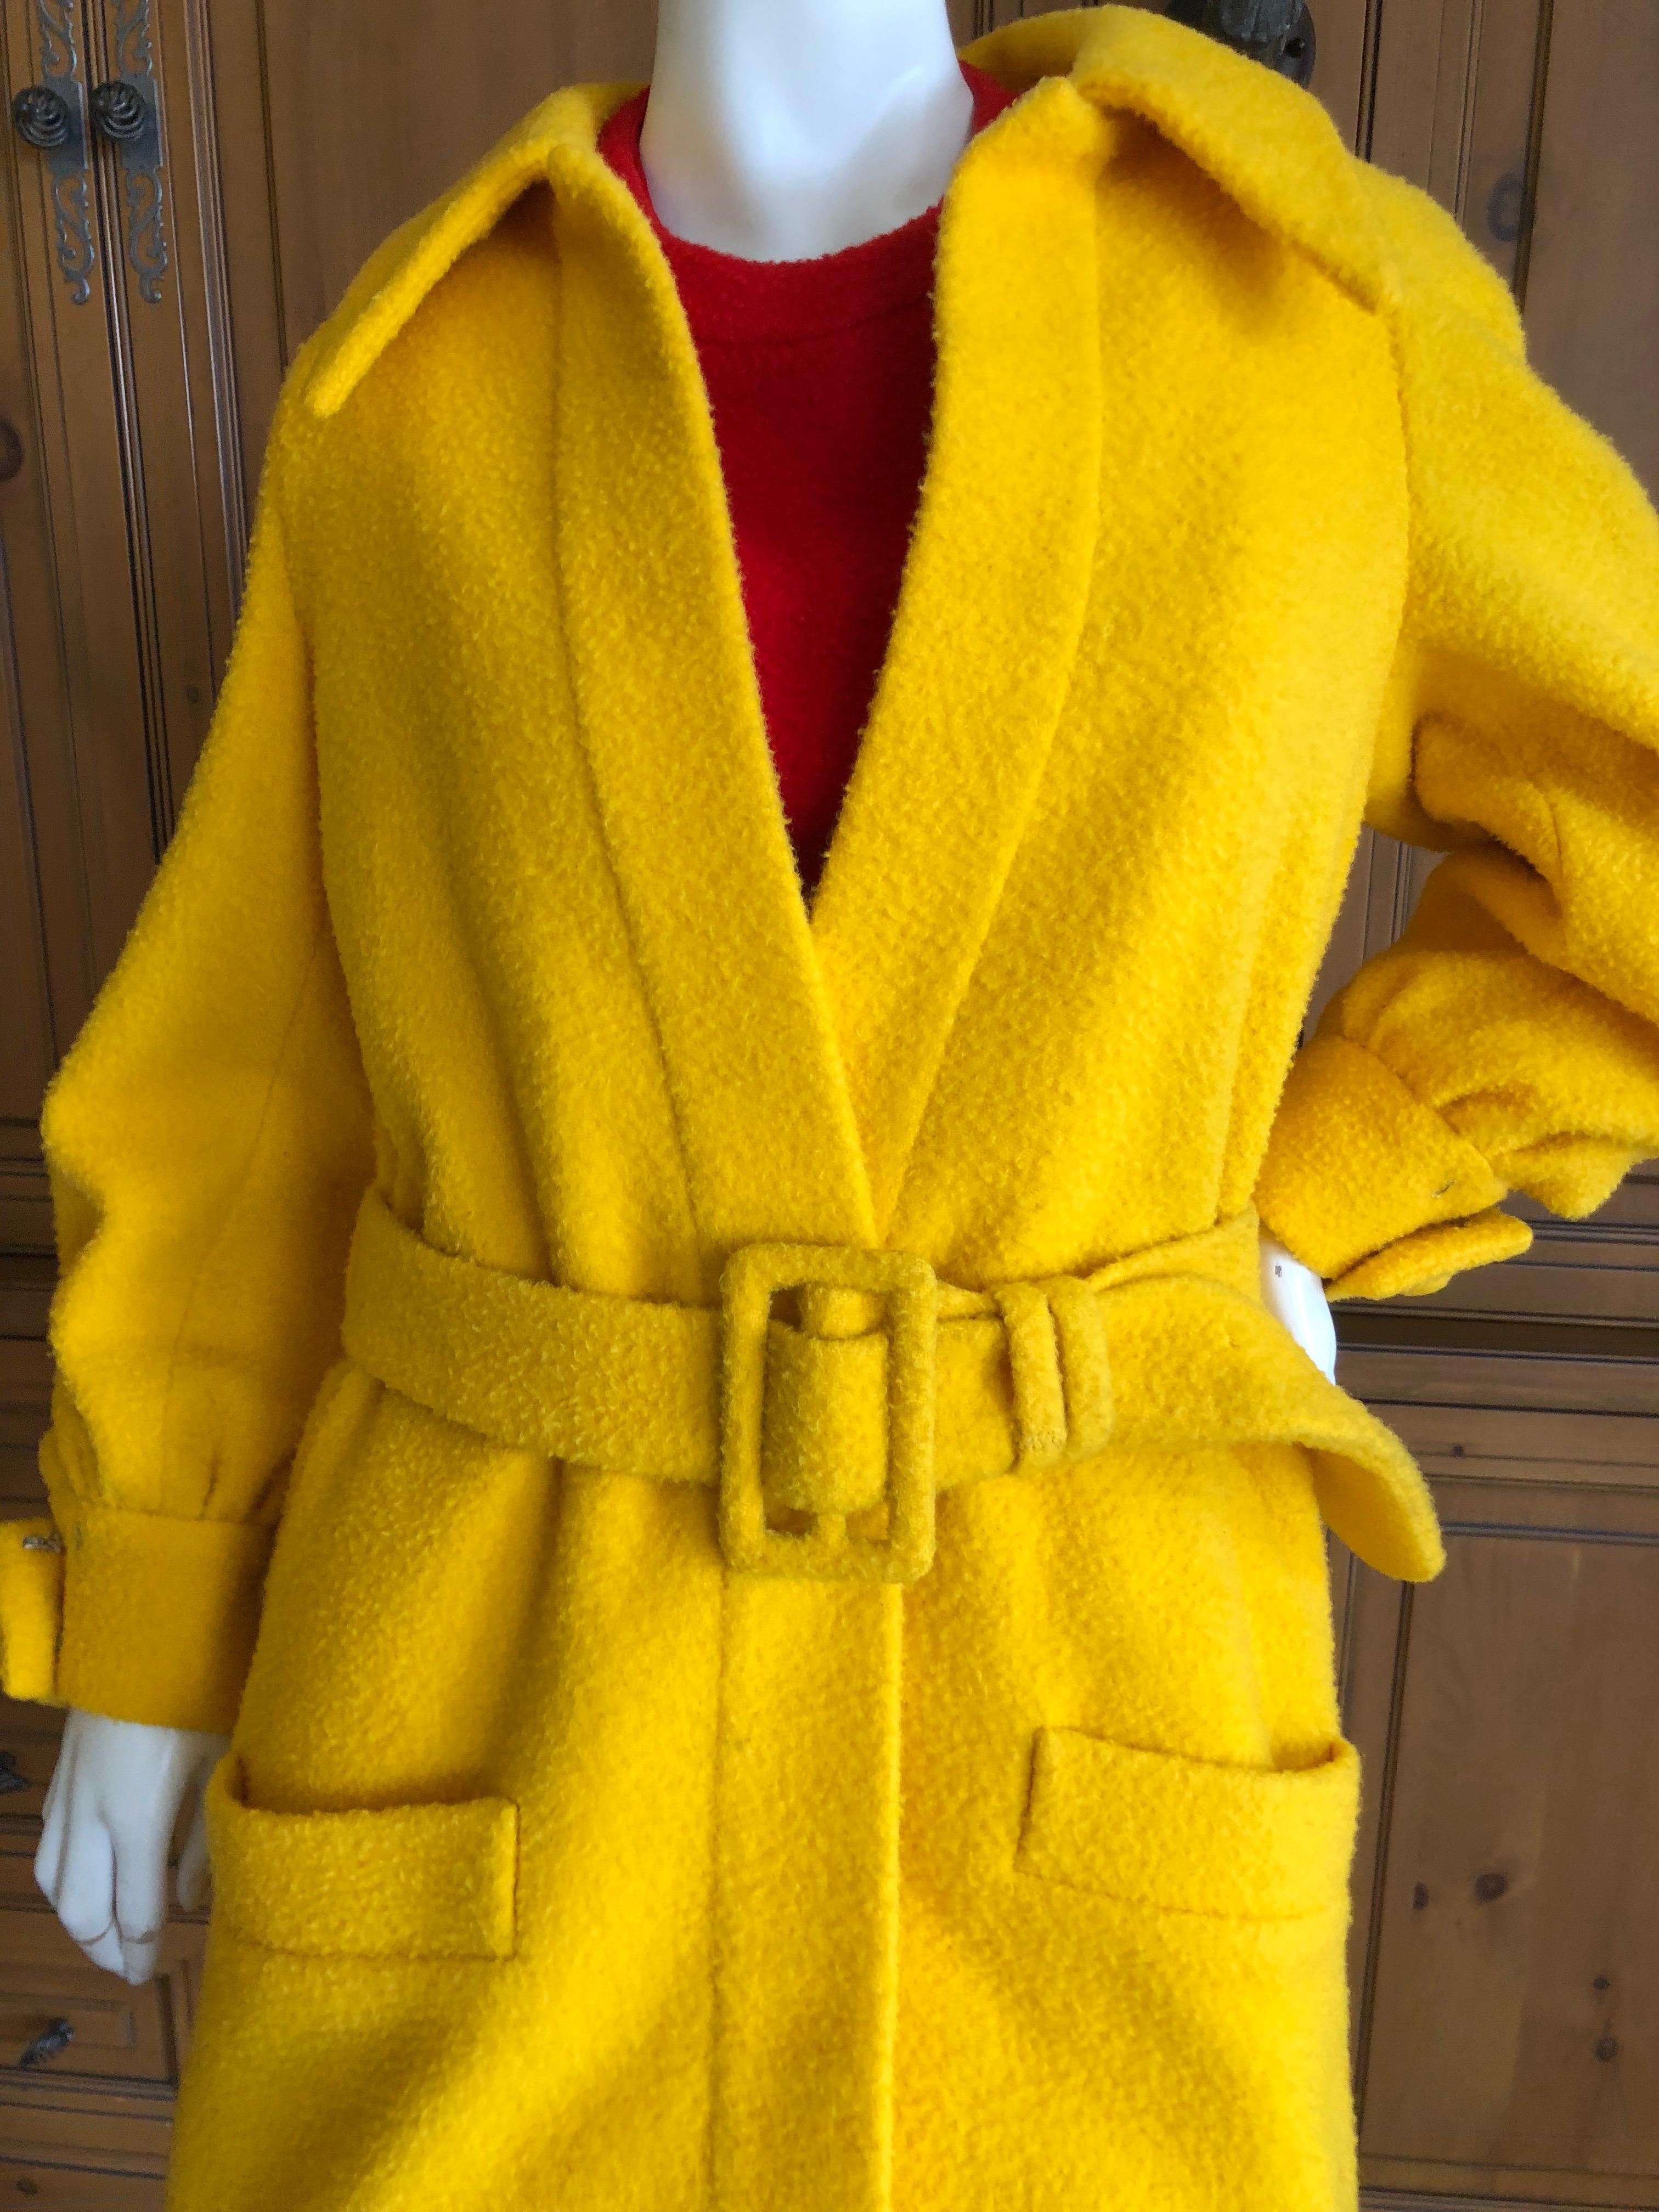 Cardinali Color Block Boucle Dress and Belted Coat, Fall 1972 For Sale 5